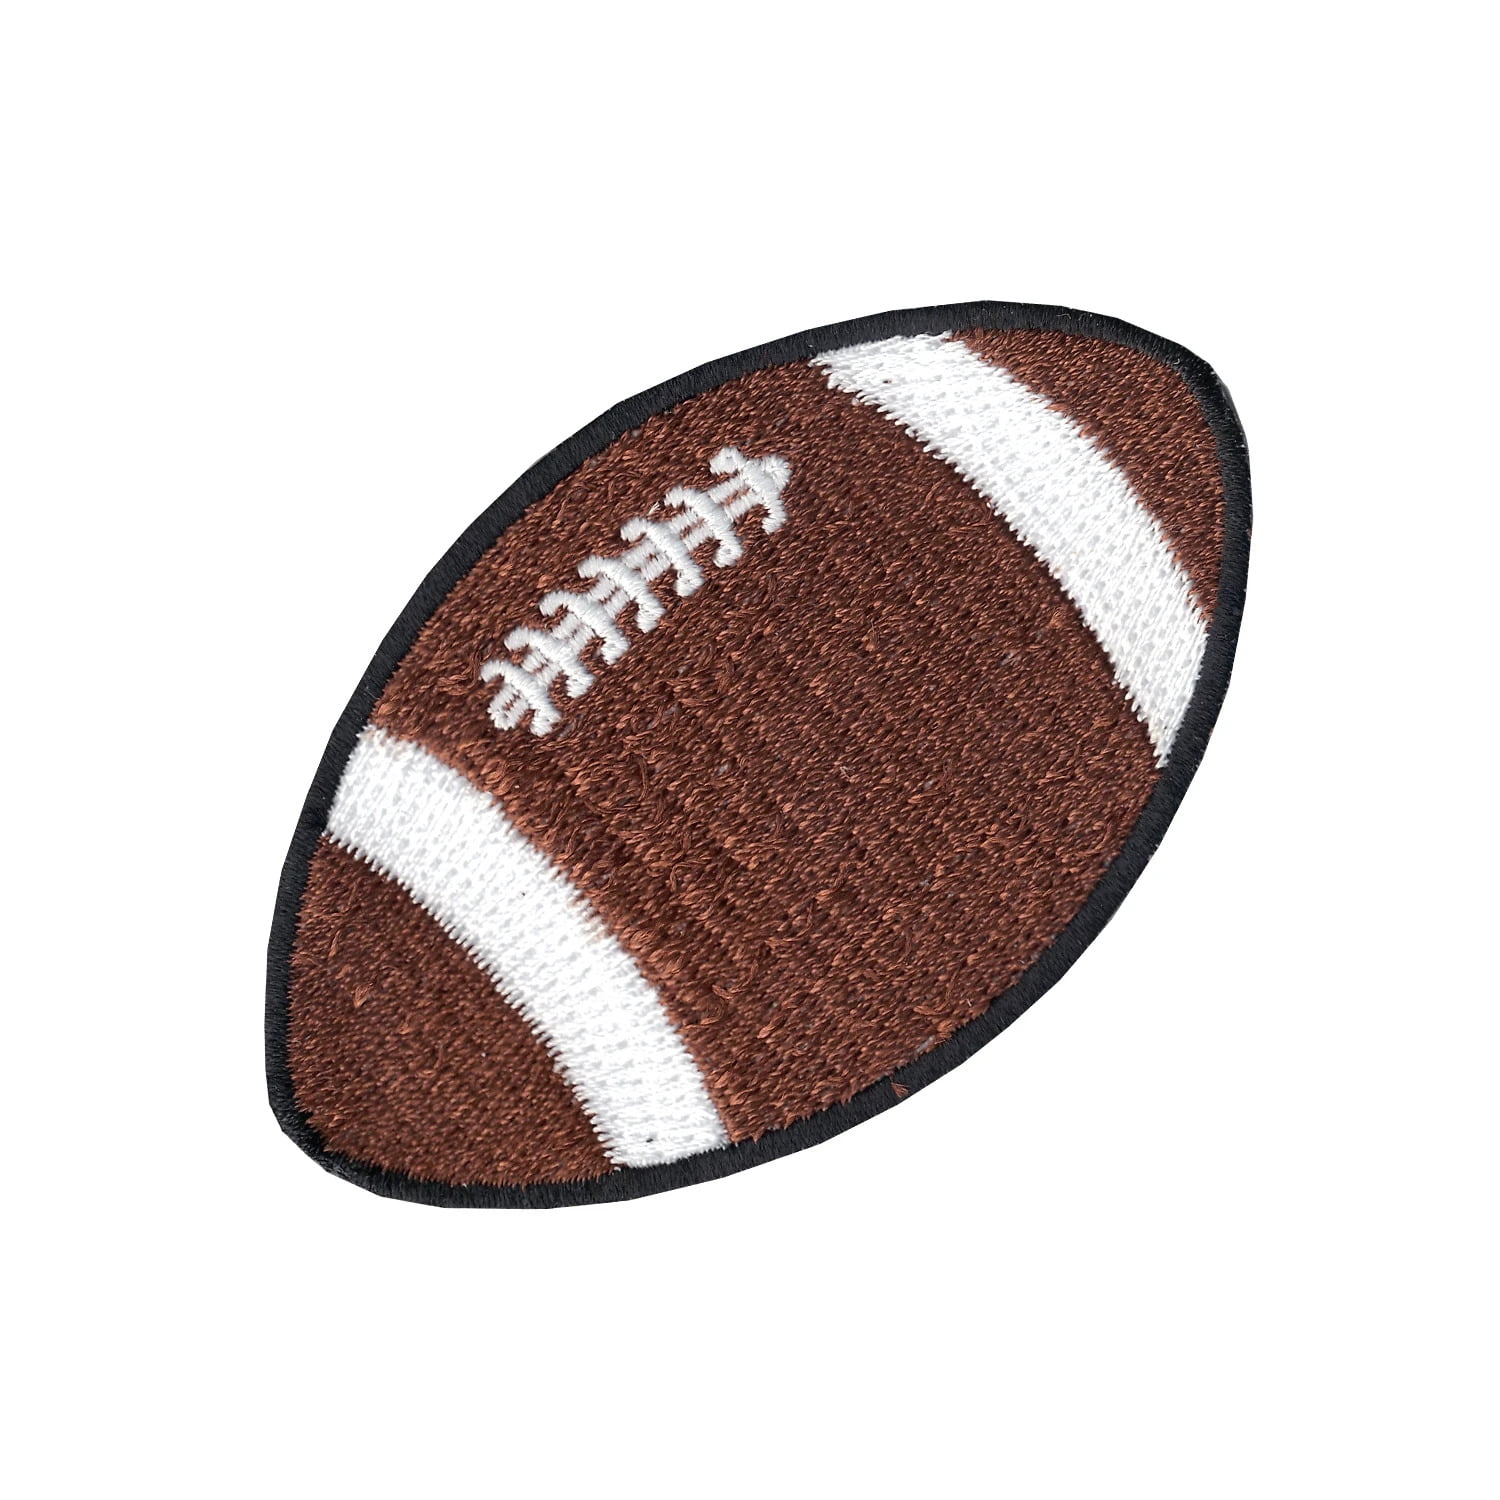 Football Pigsdkin Sports Game Iron On Embroidered Patch